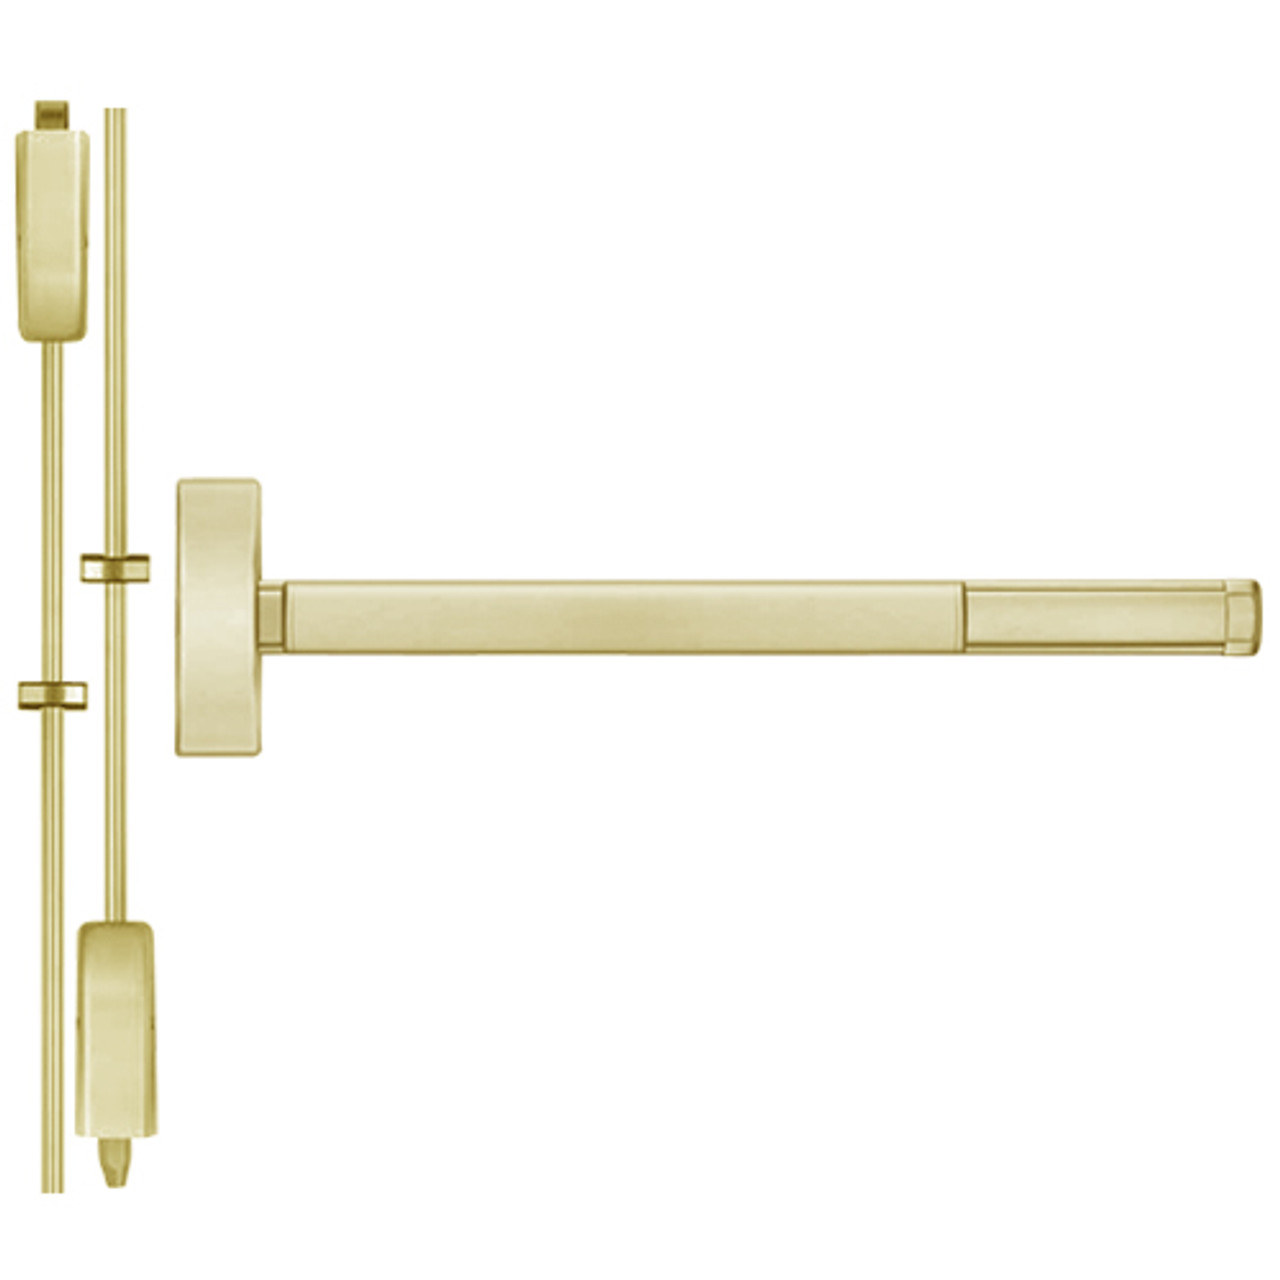 DE2203-606-36 PHI 2200 Series Non Fire Rated Apex Surface Vertical Rod Device with Delayed Egress Prepped for Key Retracts Latchbolt in Satin Brass Finish